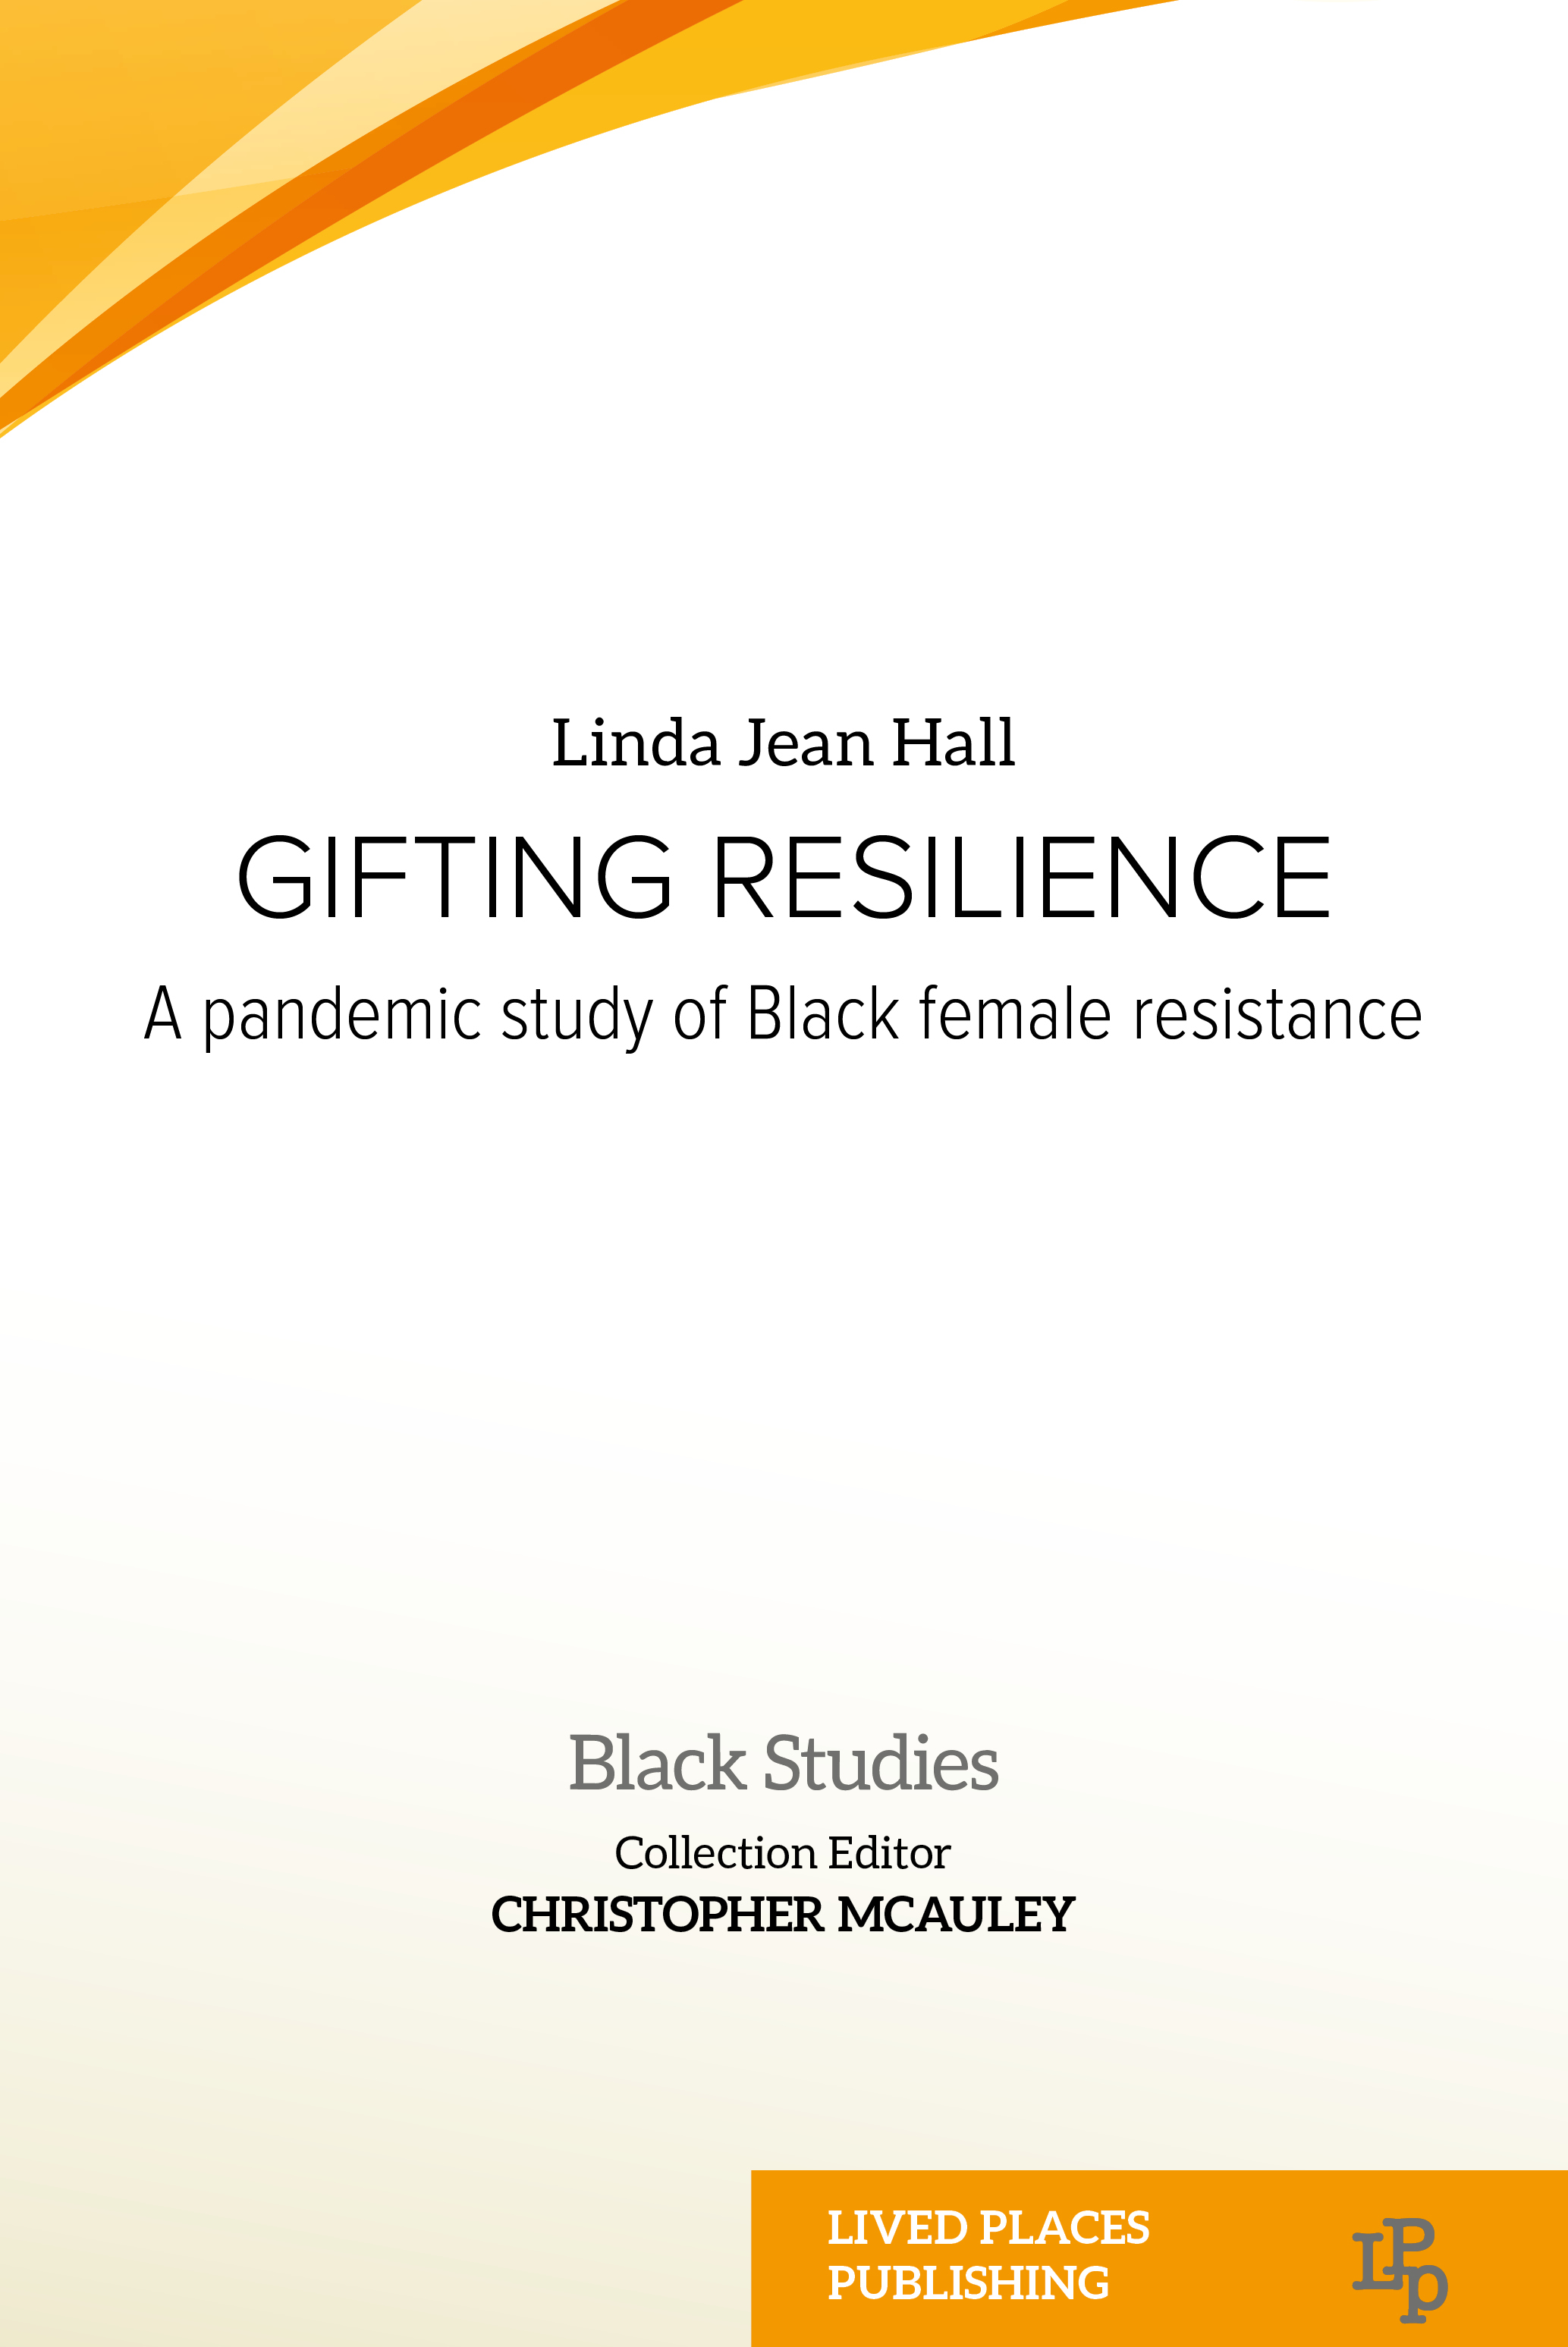 Gifting resilience: A pandemic study of Black female resistance by Linda Jean Hall